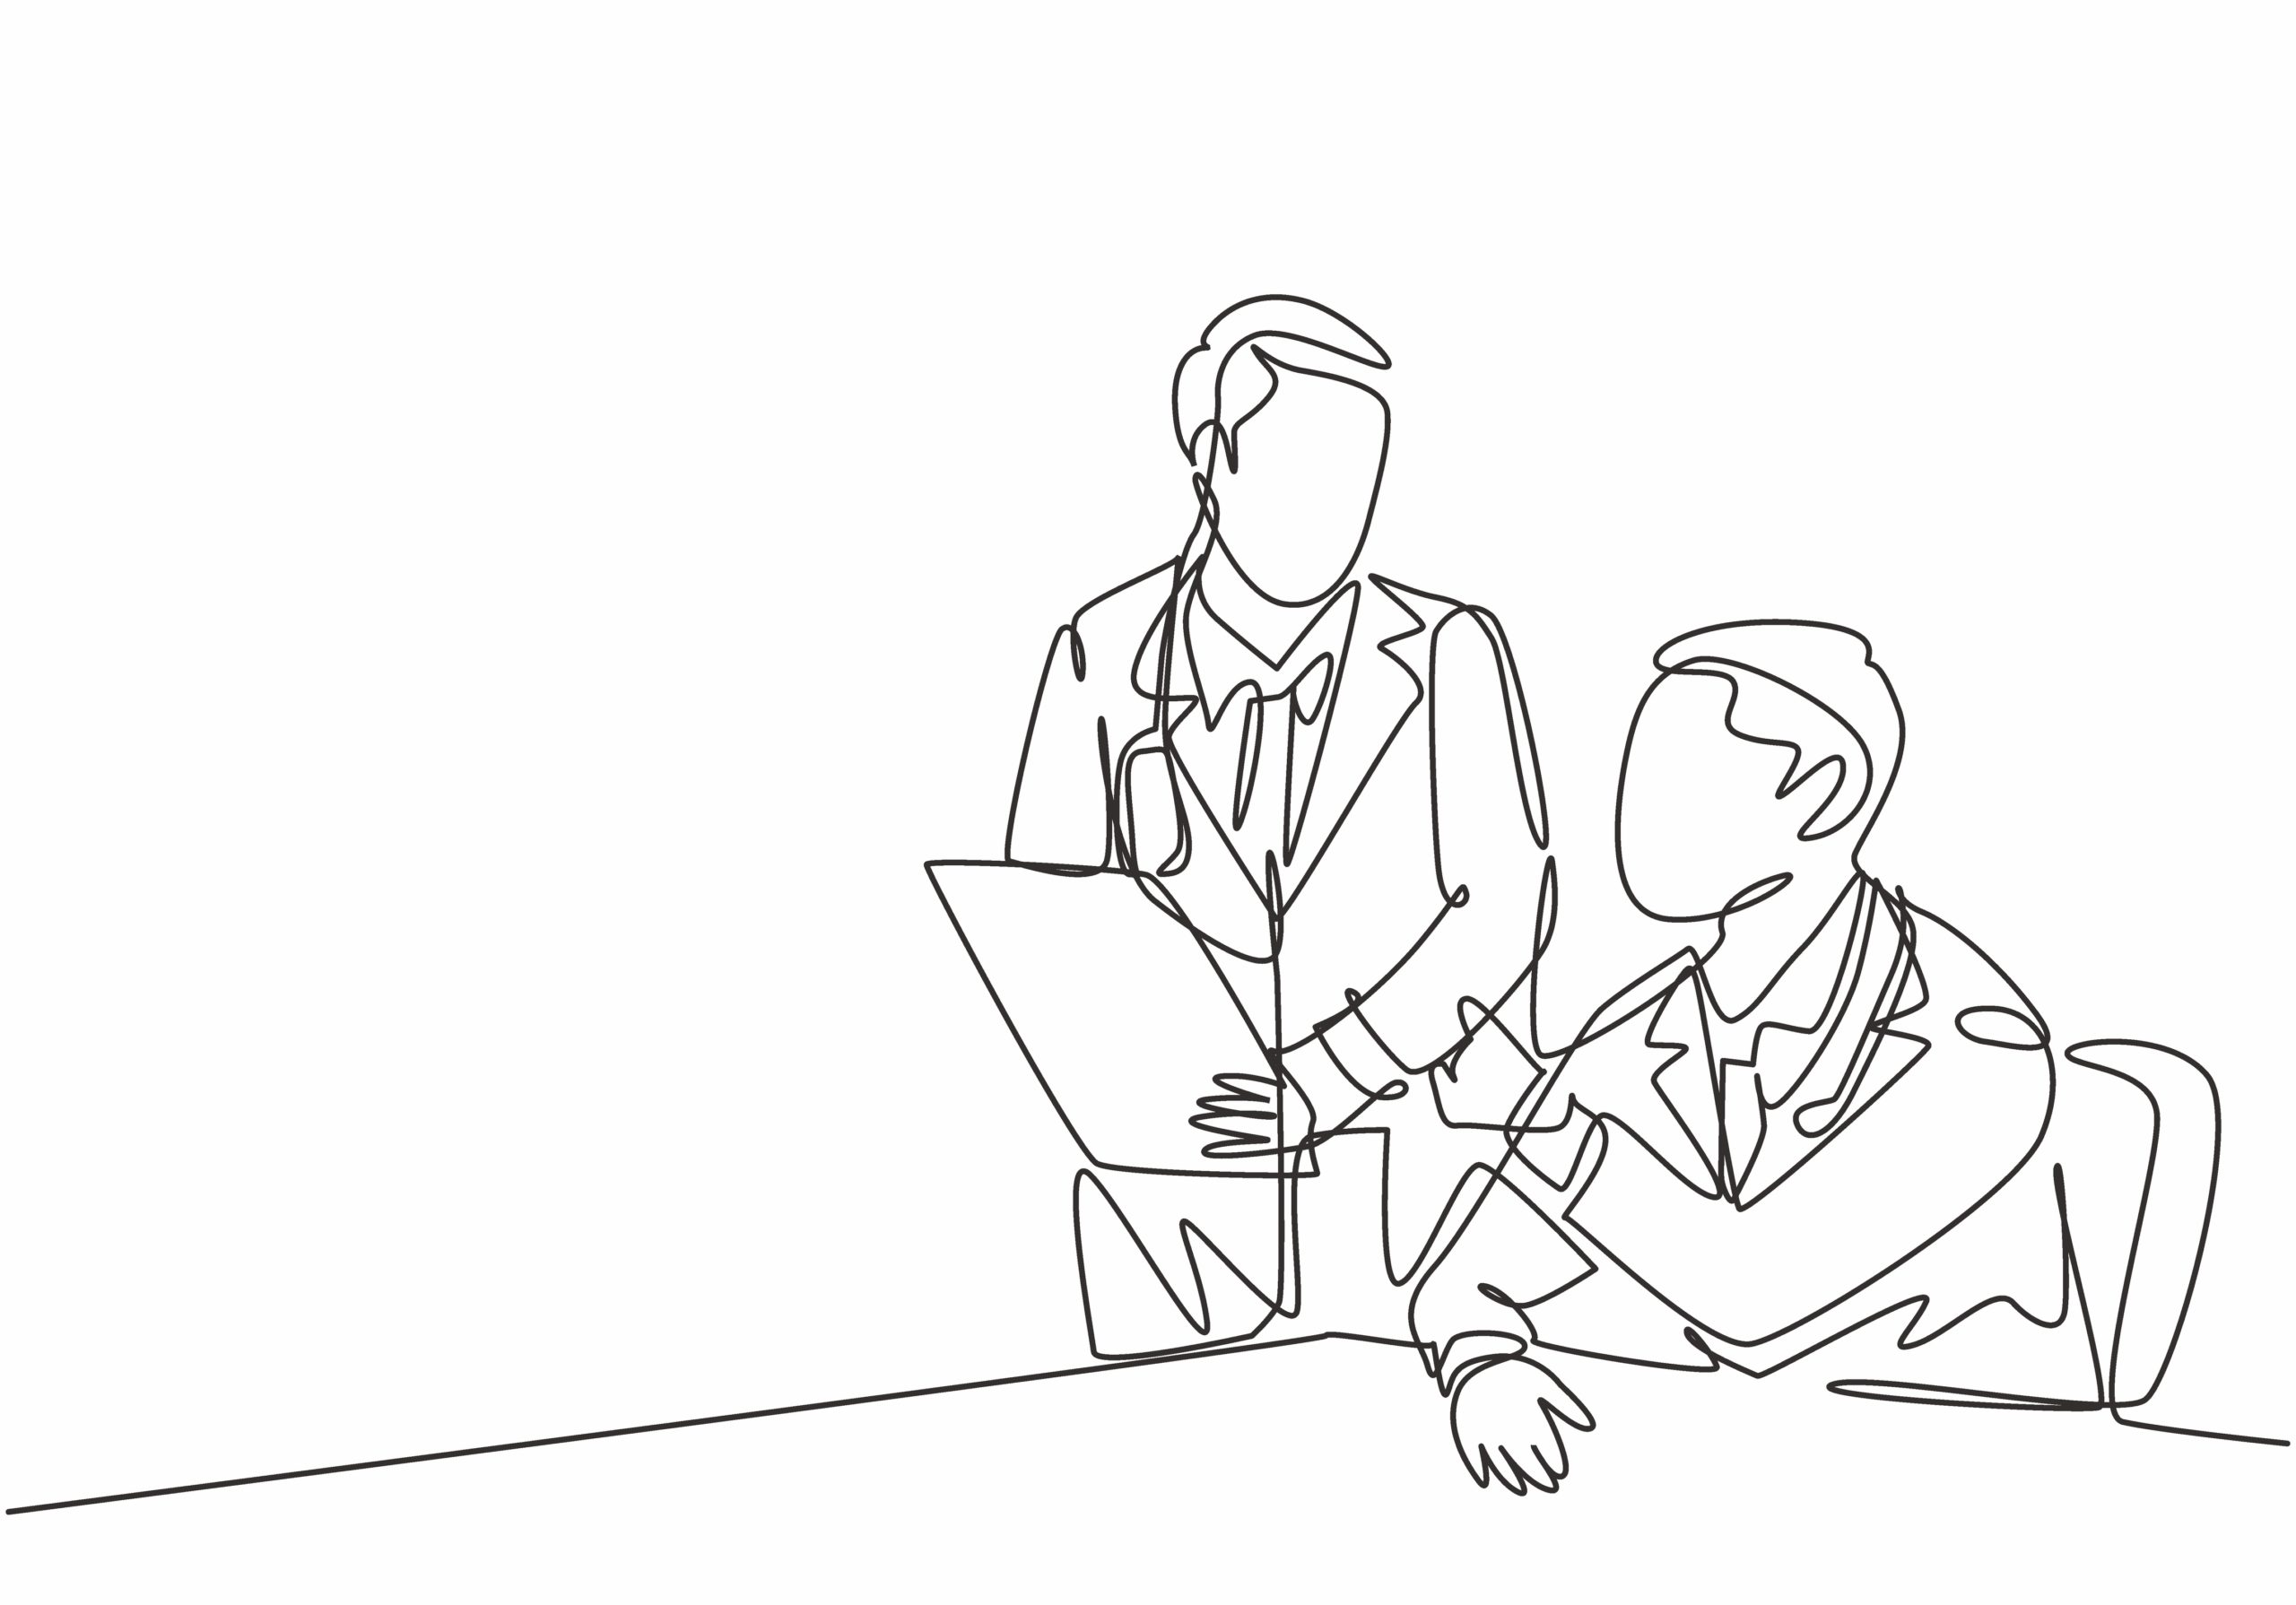 One continuous line drawing of a doctor discussing and diagnosing patient illness from their x-ray photo result